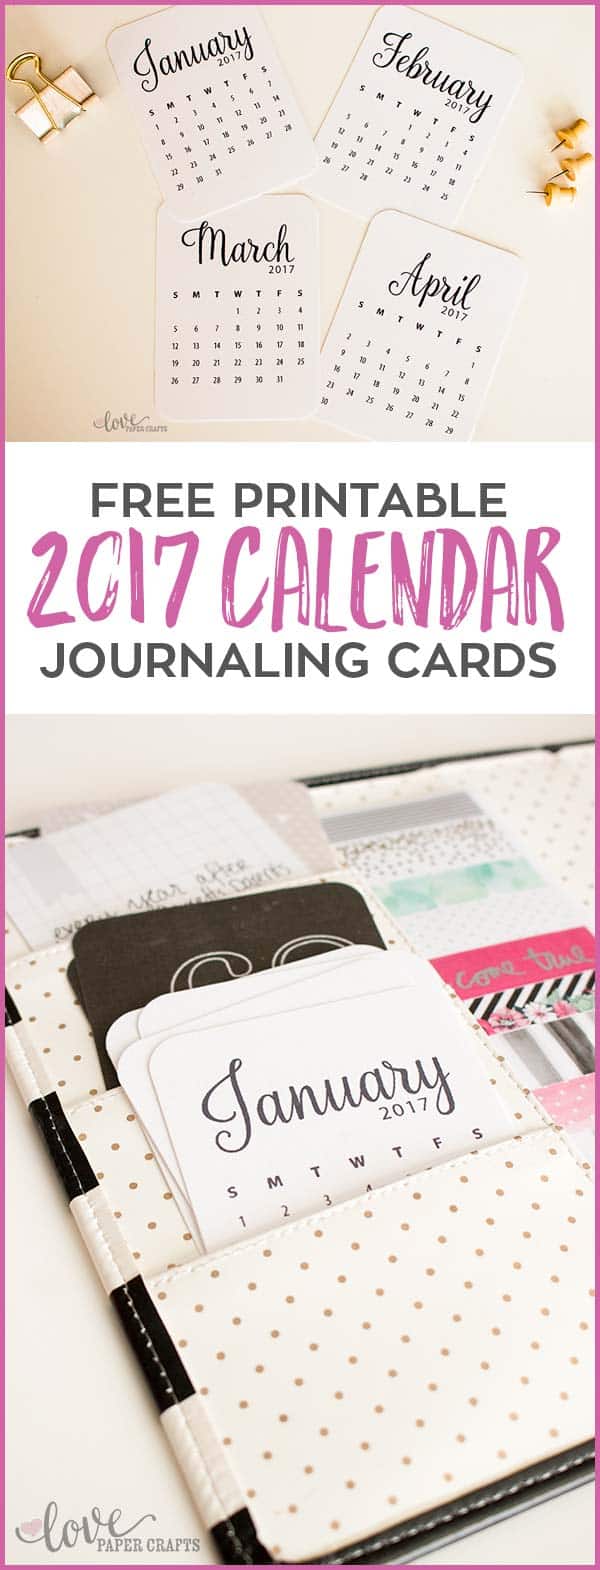 Free Printable 2017 Calendar Journaling Cards. These are cute and can be used in the #planner #projectlife or #scrapbooking | LovePaperCrafts.com